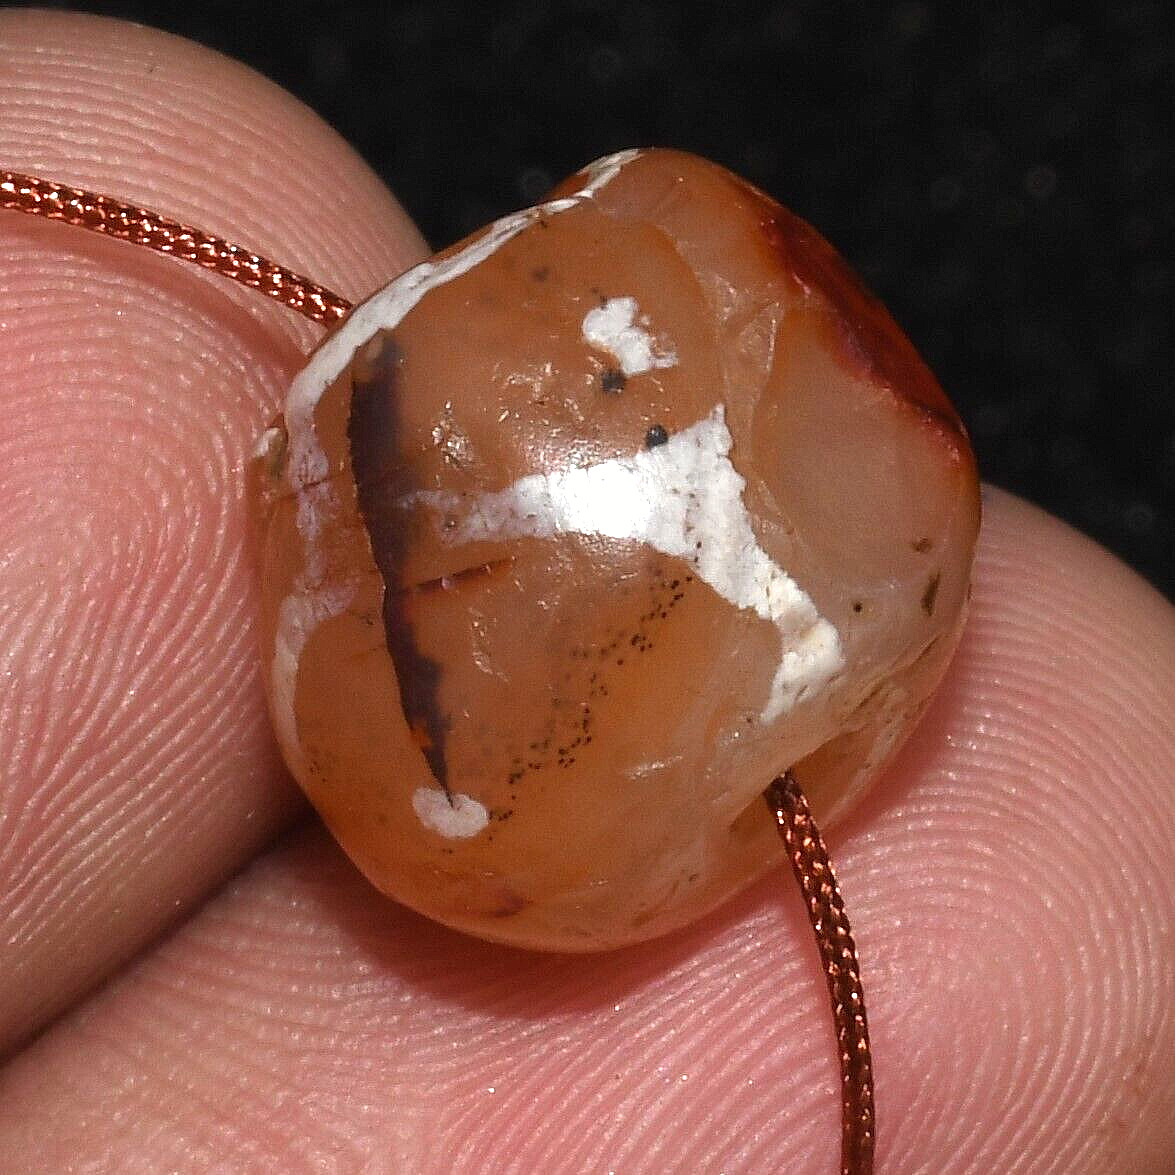 Round Genuine Ancient Etched Carnelian Bead in good Condition over 1000 Year Old